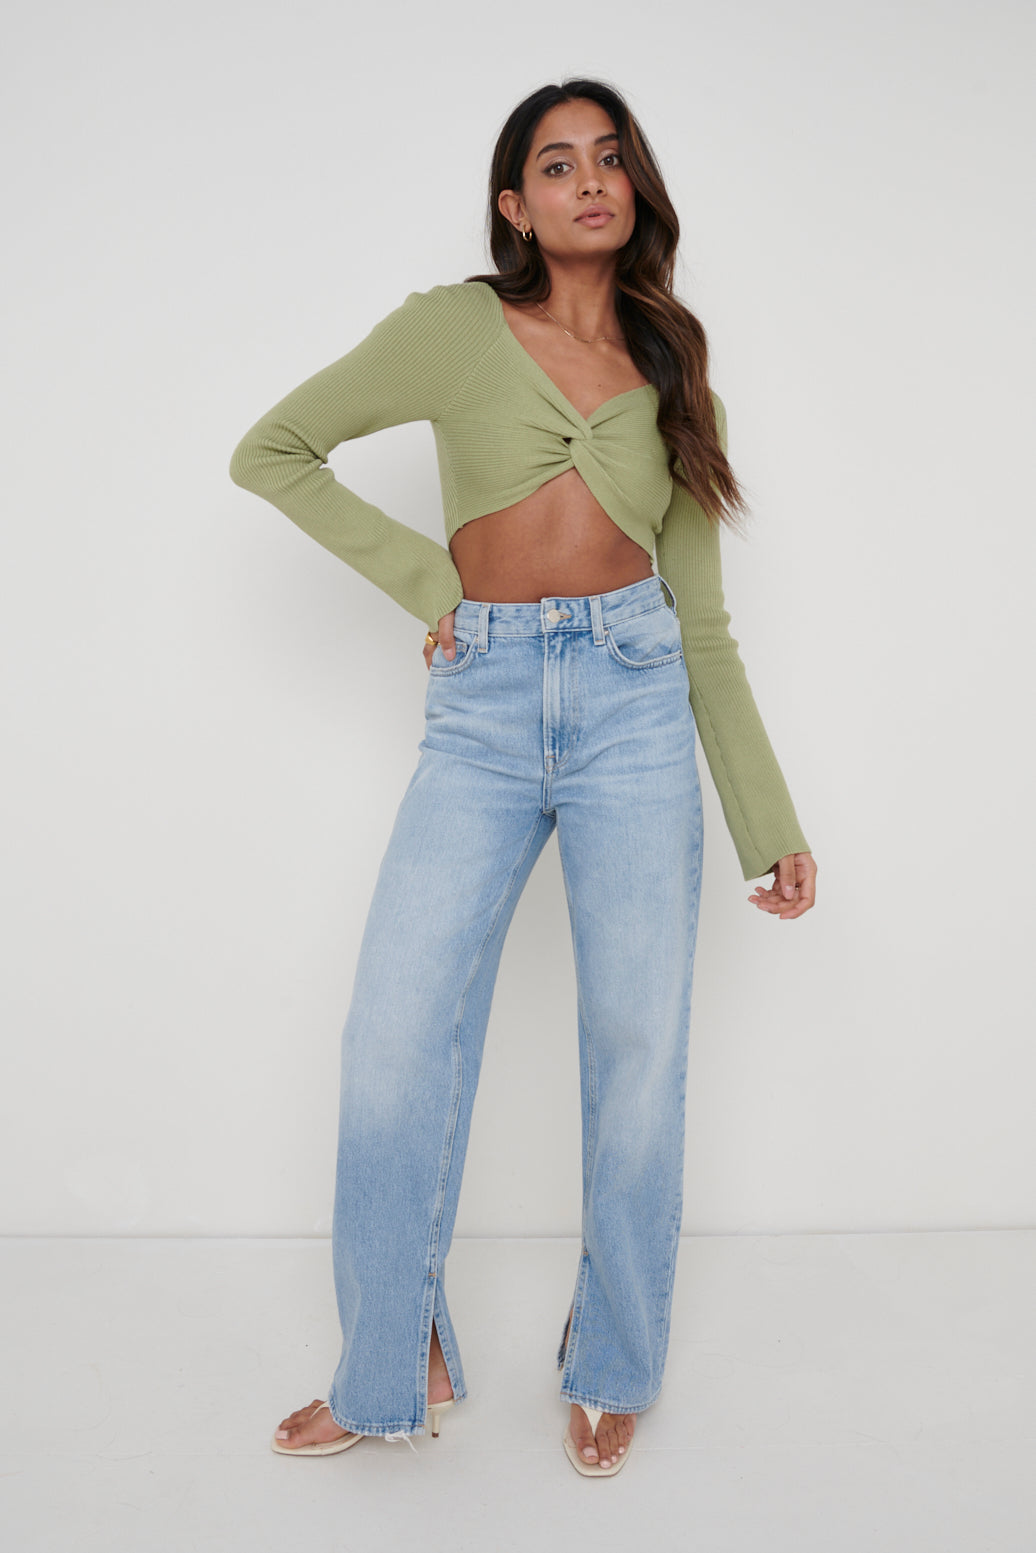 Maisie Long Sleeve Twist Knit Top - Olive